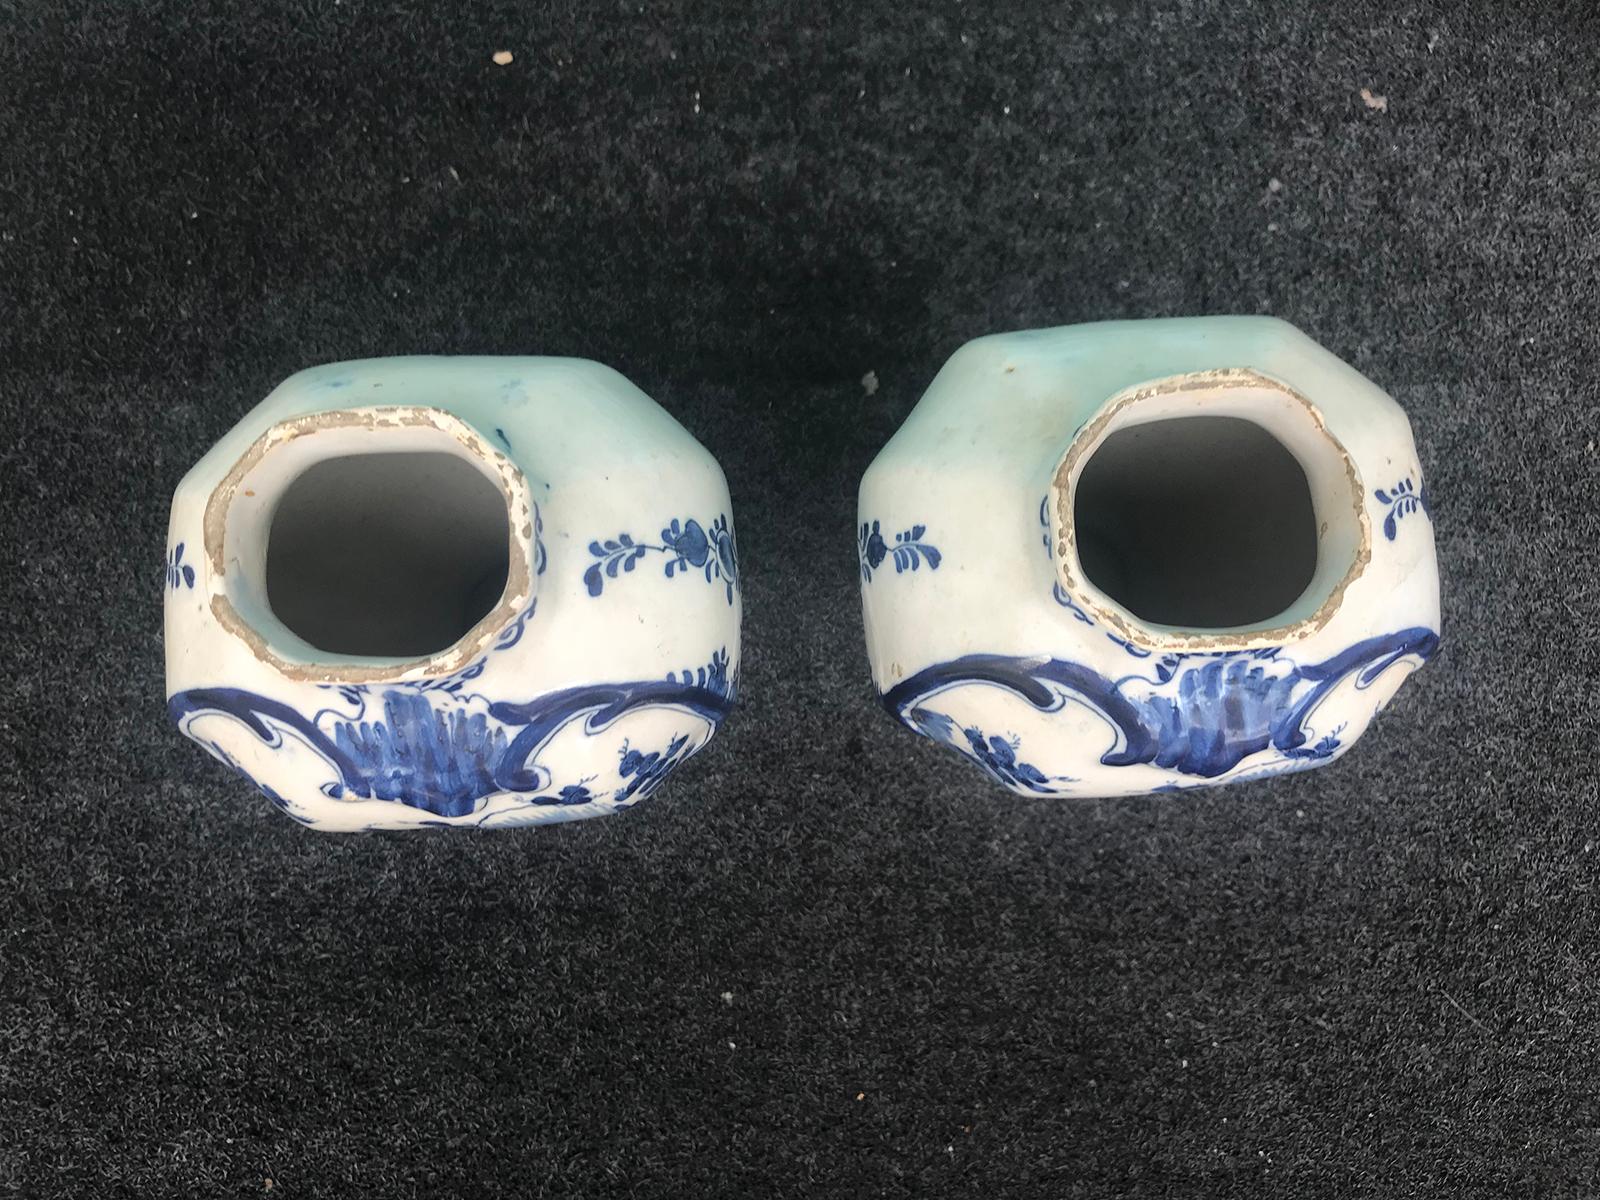 Pair of 18th century delft urns, signed.